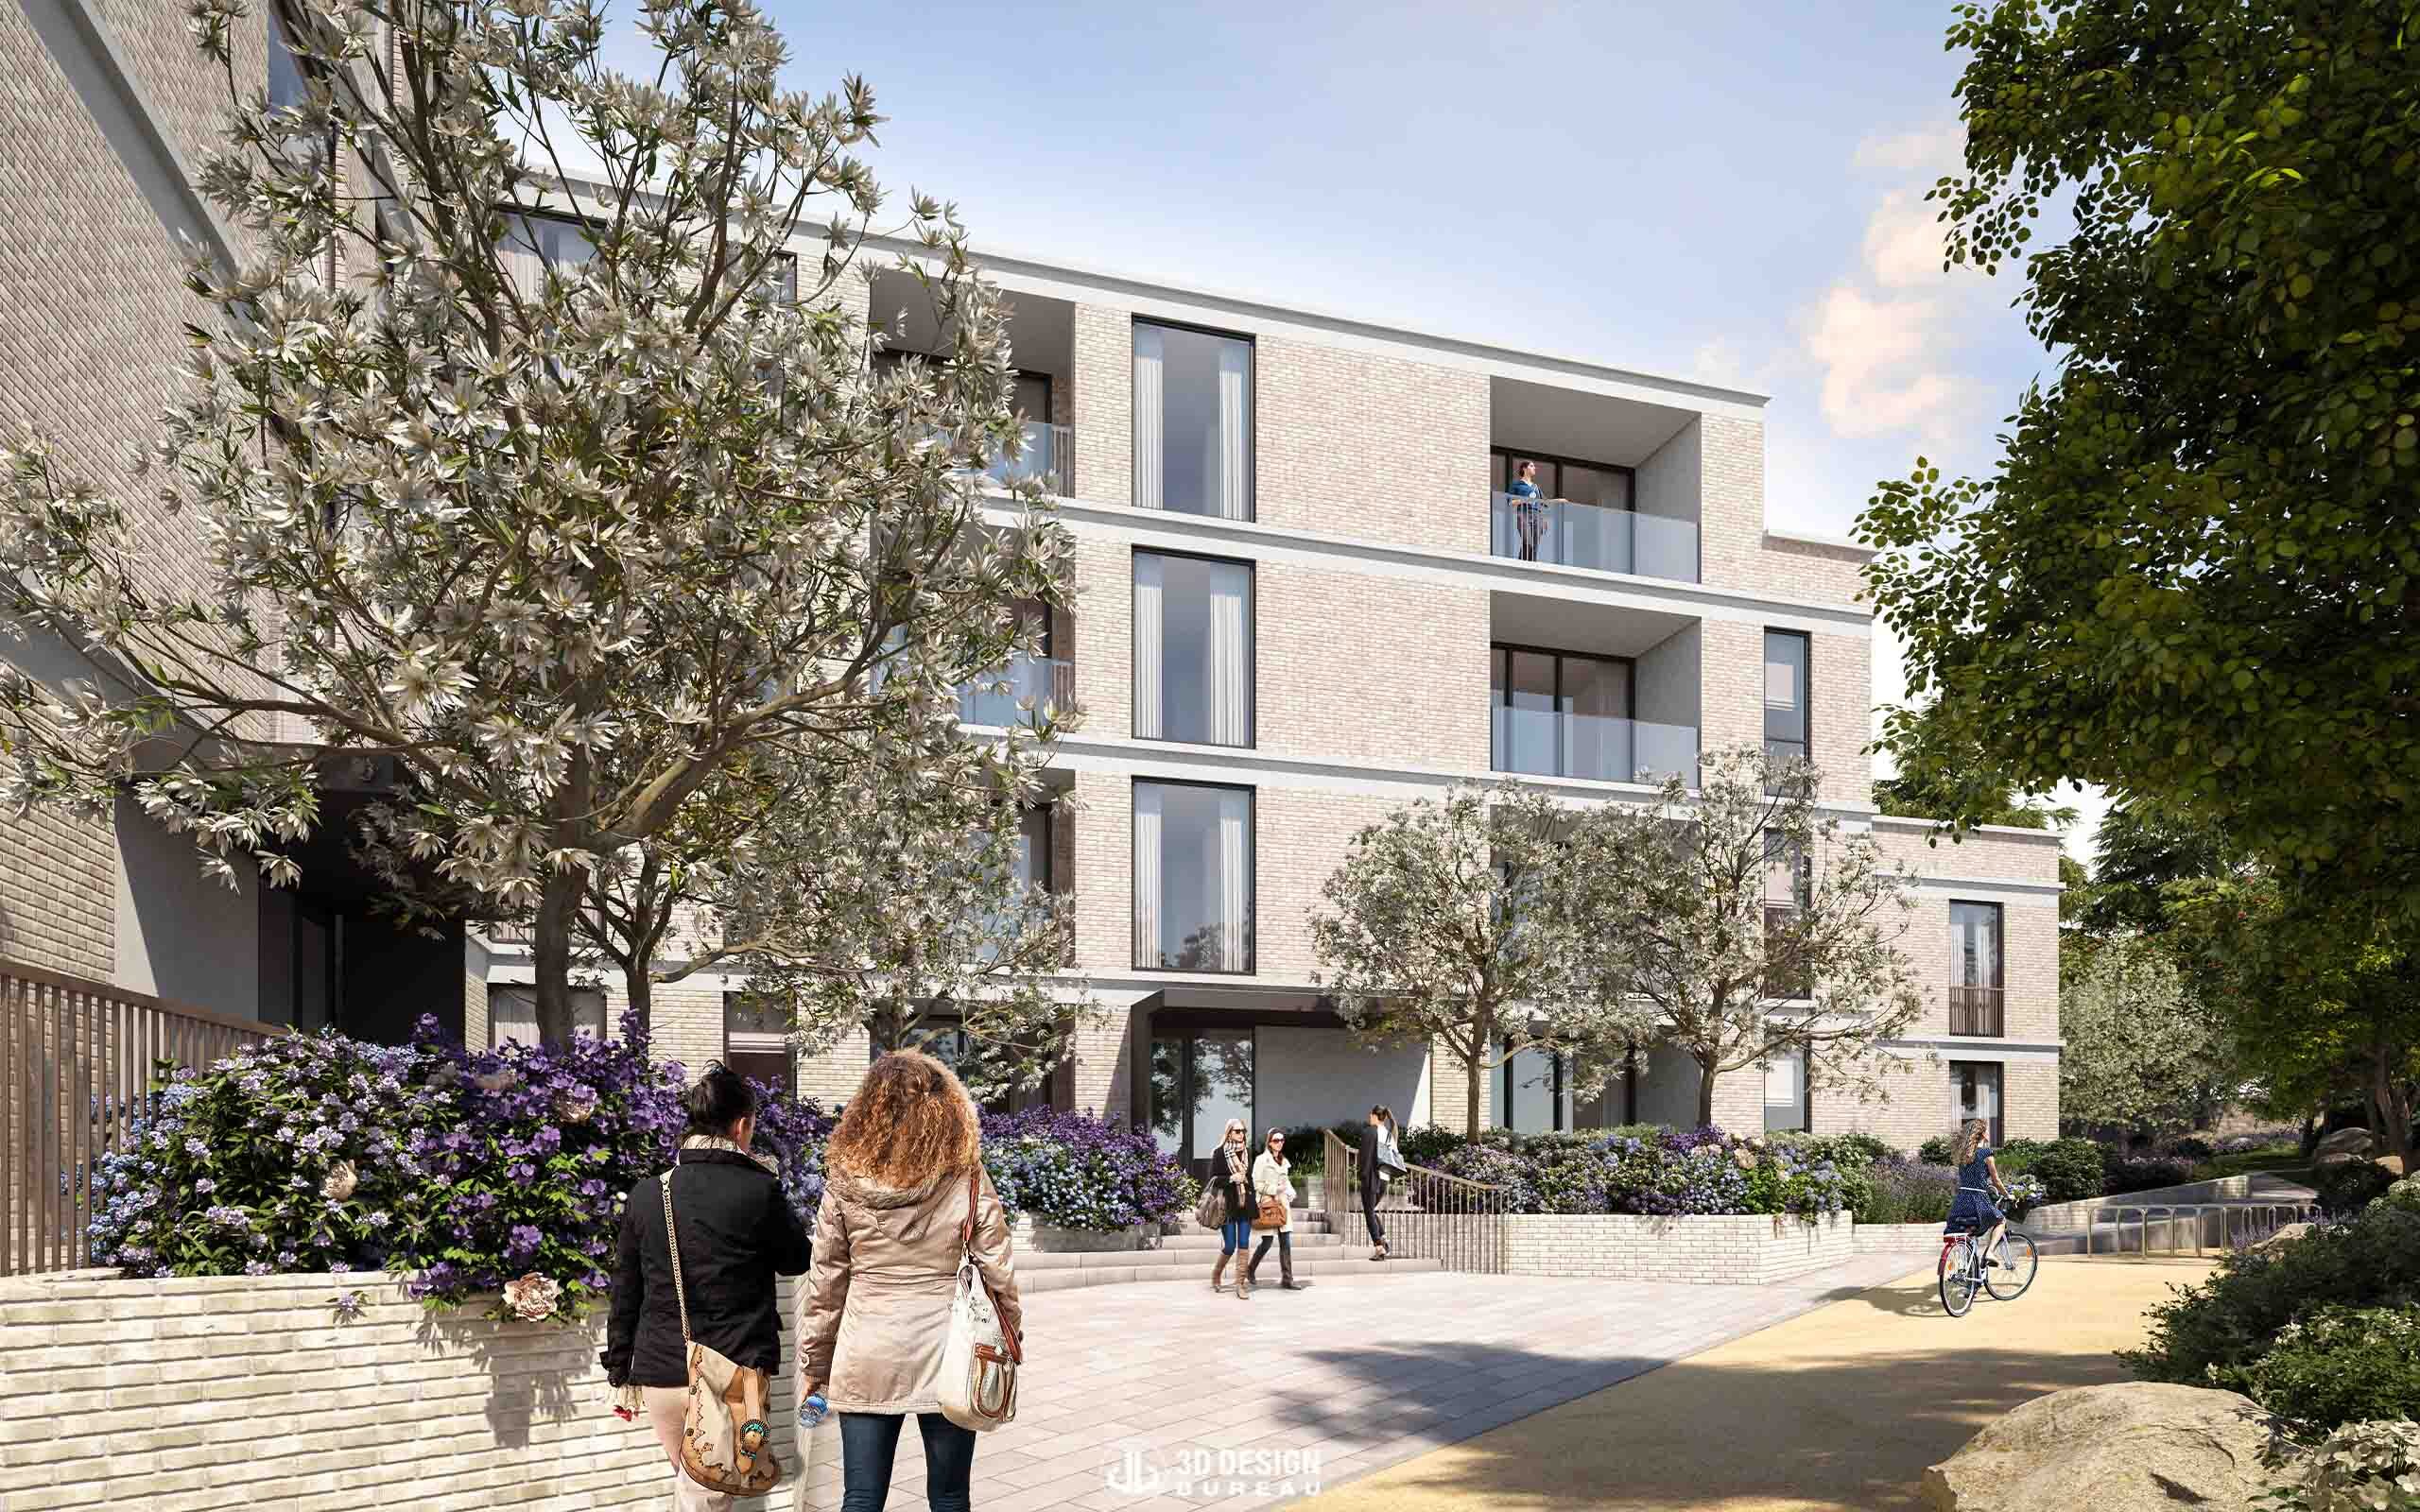 Computer generated imagery of the proposed development Graymount in Howth